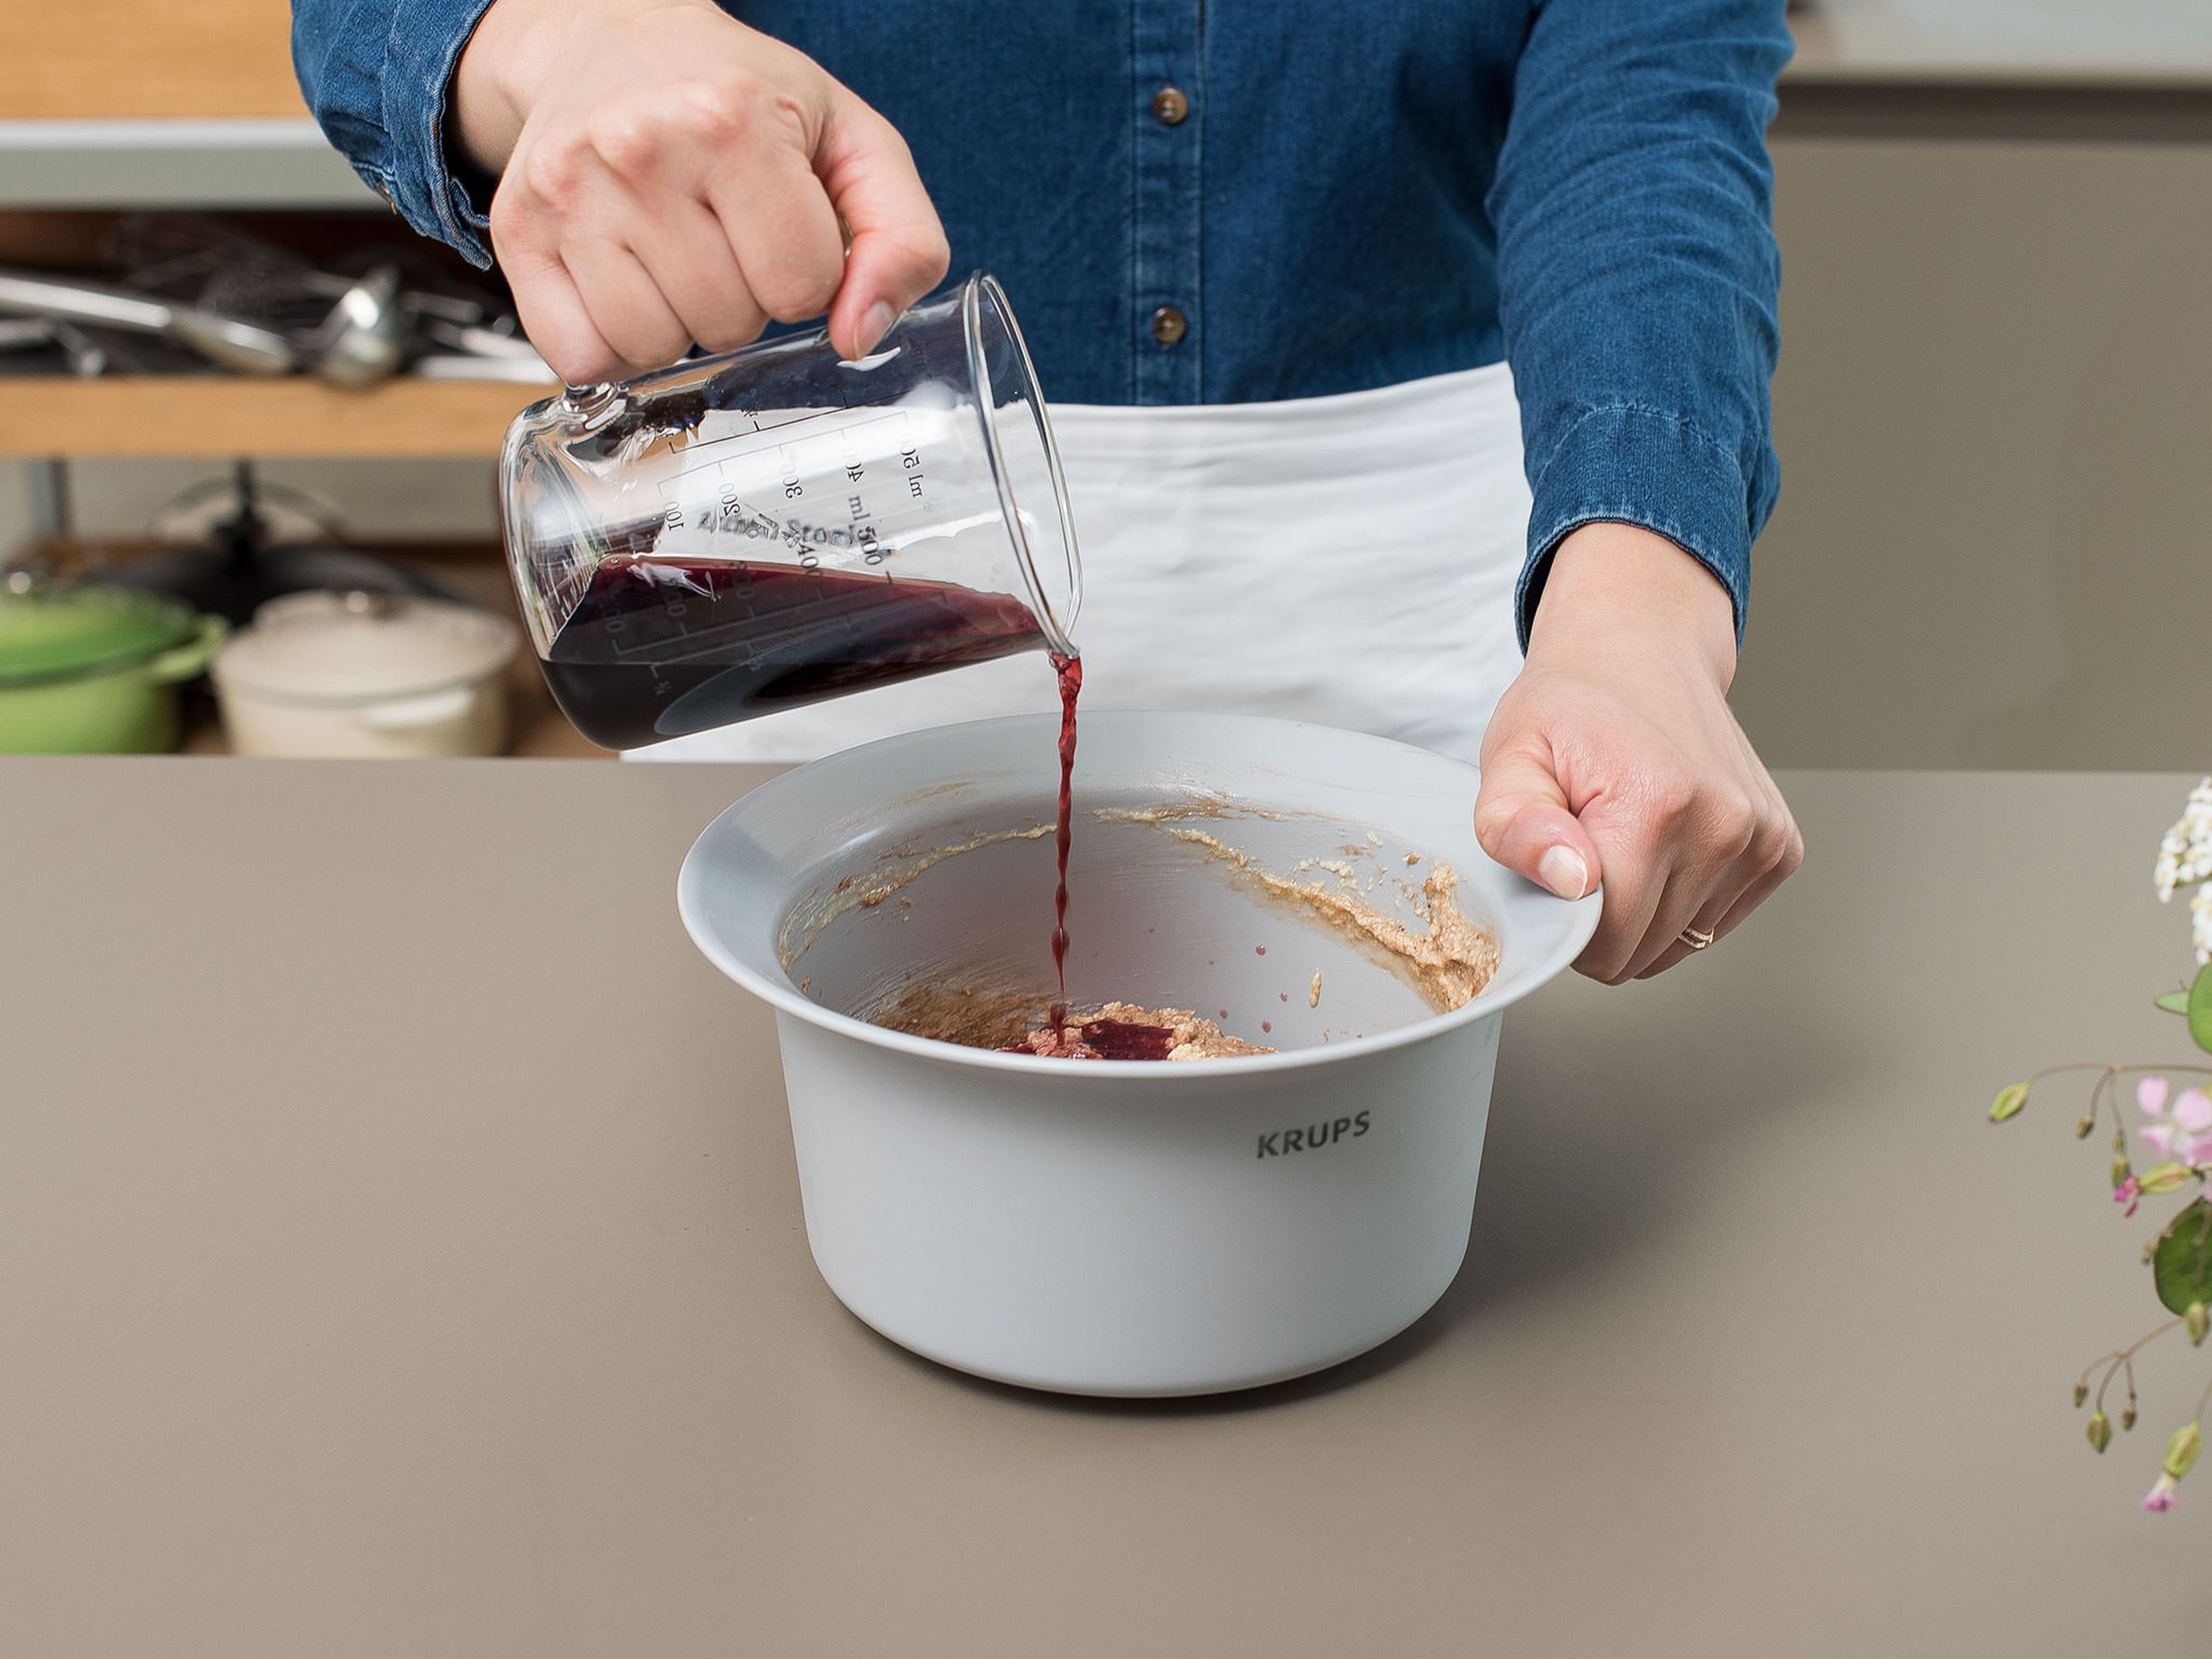 Add the red wine to the bowl alternately with the flour mixture and stir until just combined. Chop some of the chocolate and fold it into the batter.